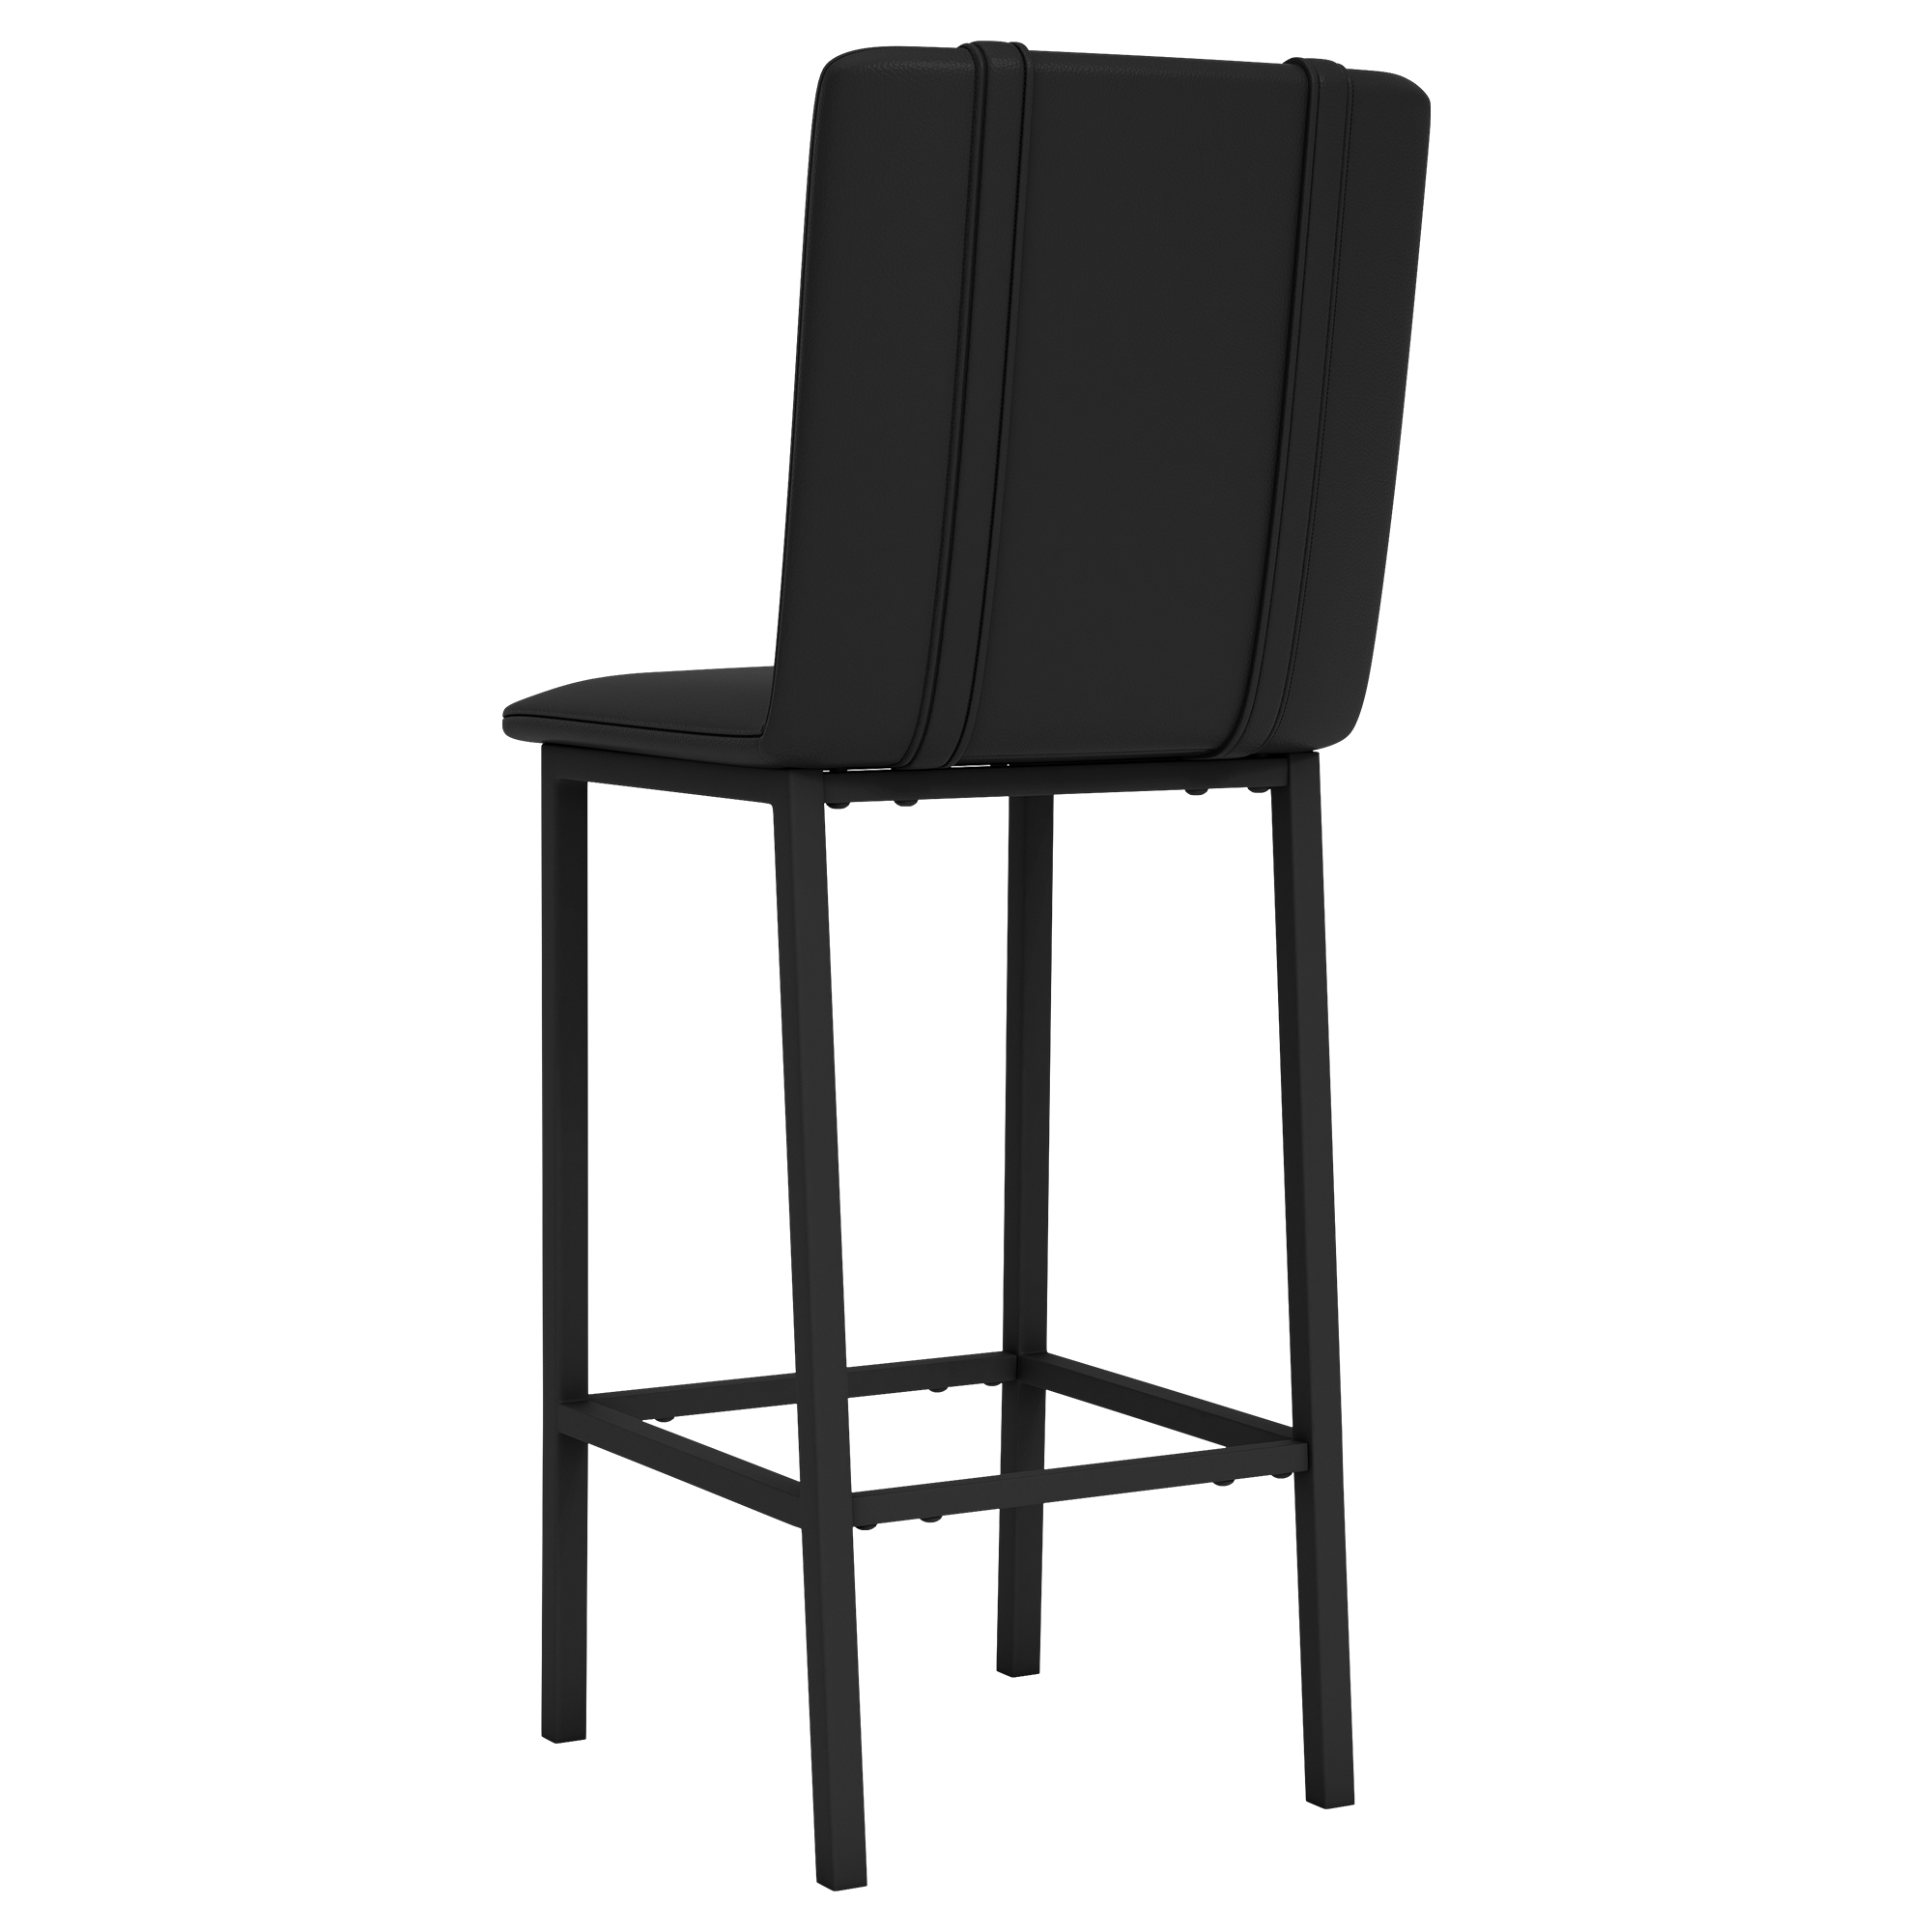 Bar Stool 500 with Milwaukee Brewers Cooperstown Primary Set of 2